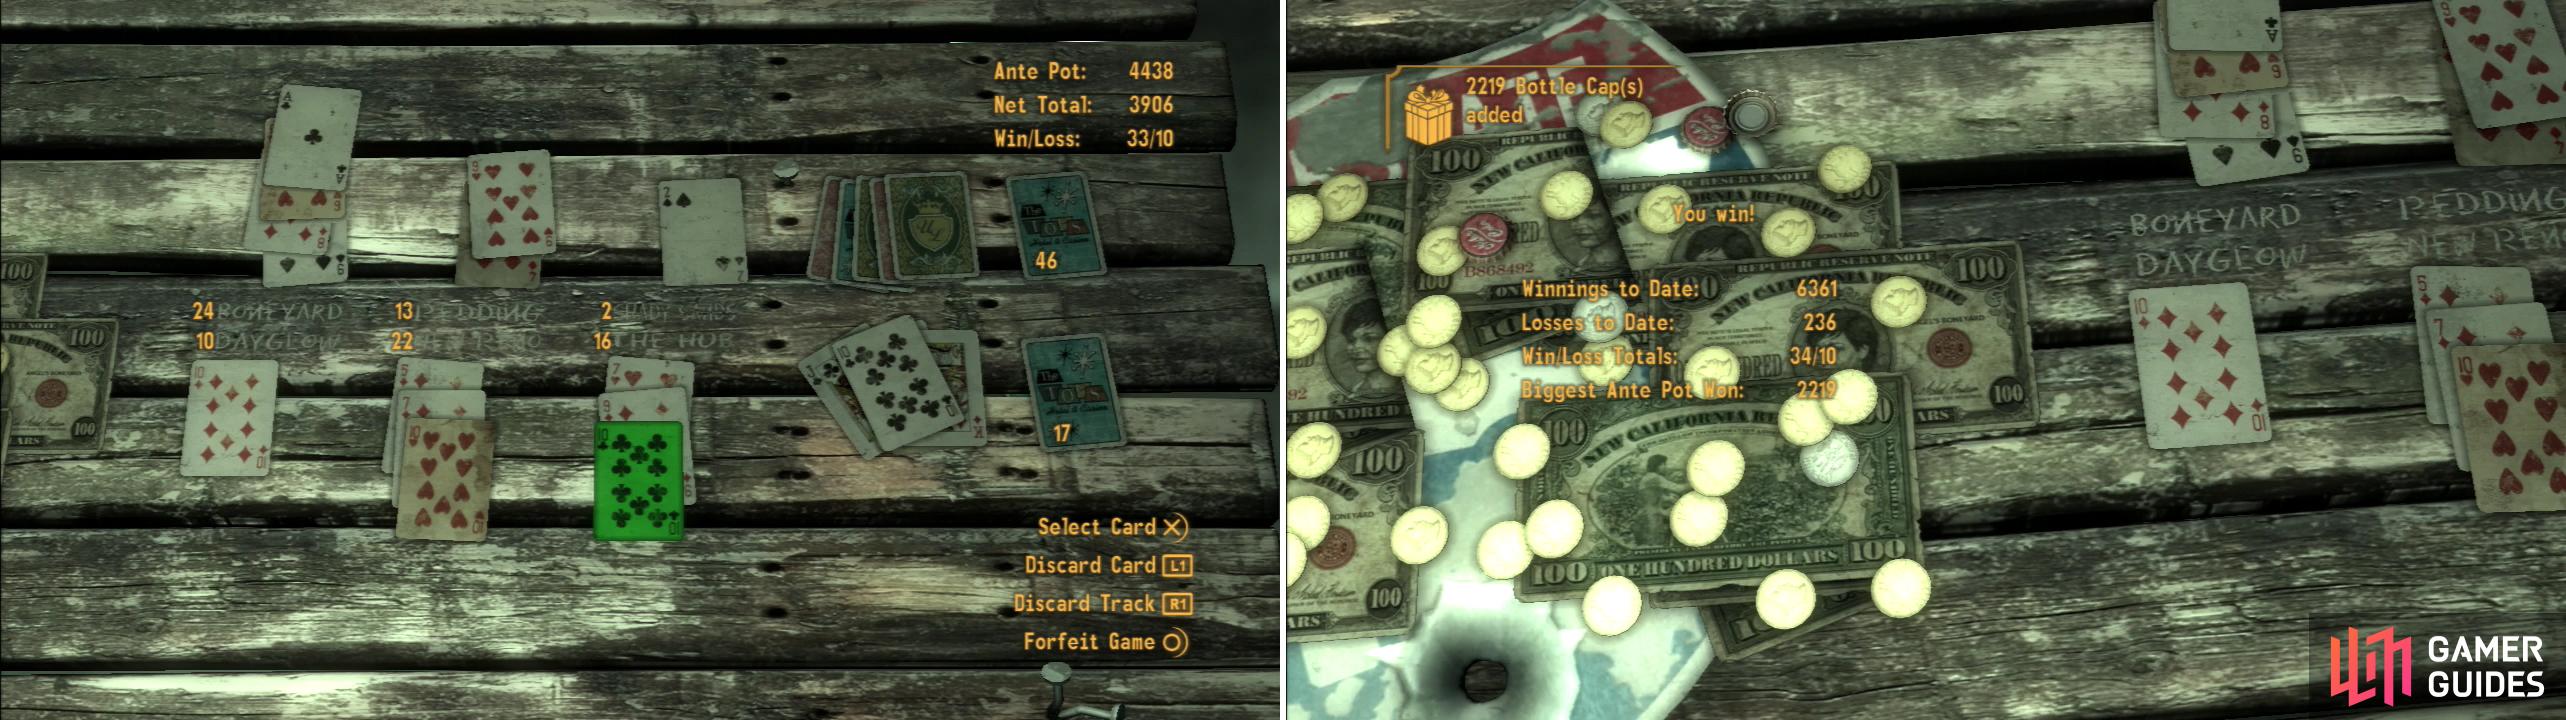 Win a game of Caravan against Lacey in the Mojave Outpost Barracks (left) to obtain an absurd amount of Caps (right).